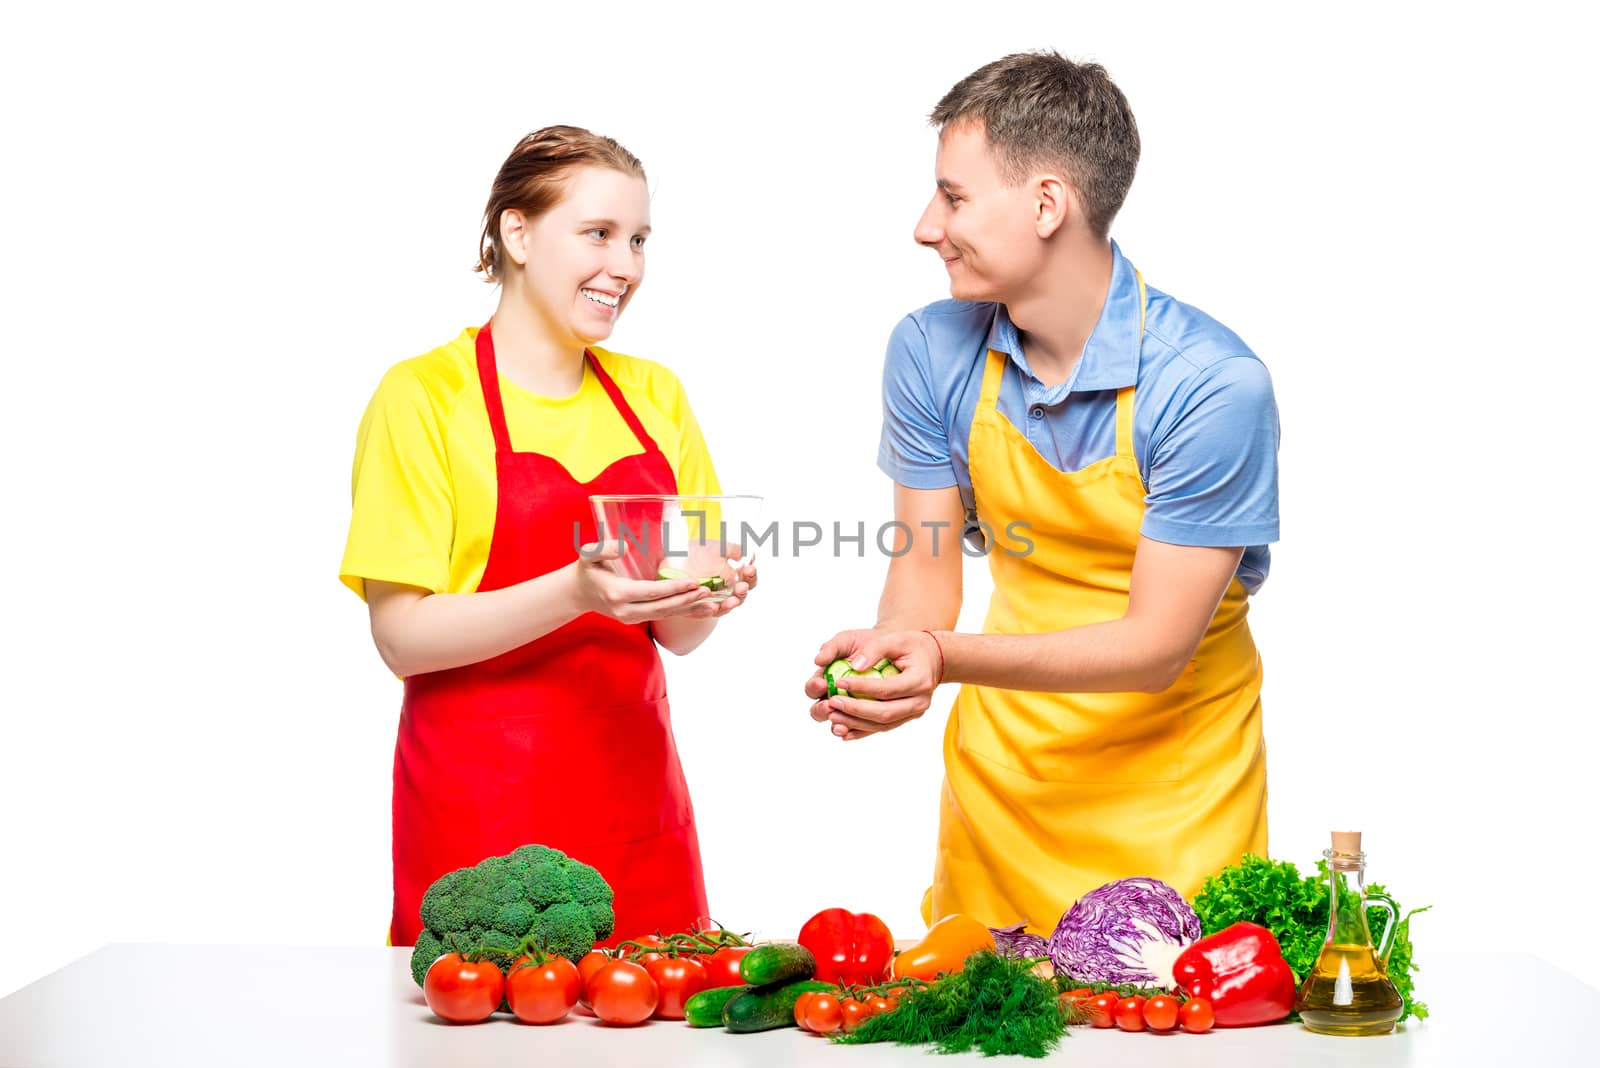 man and woman preparing healthy vegetable salad isolated on whit by kosmsos111